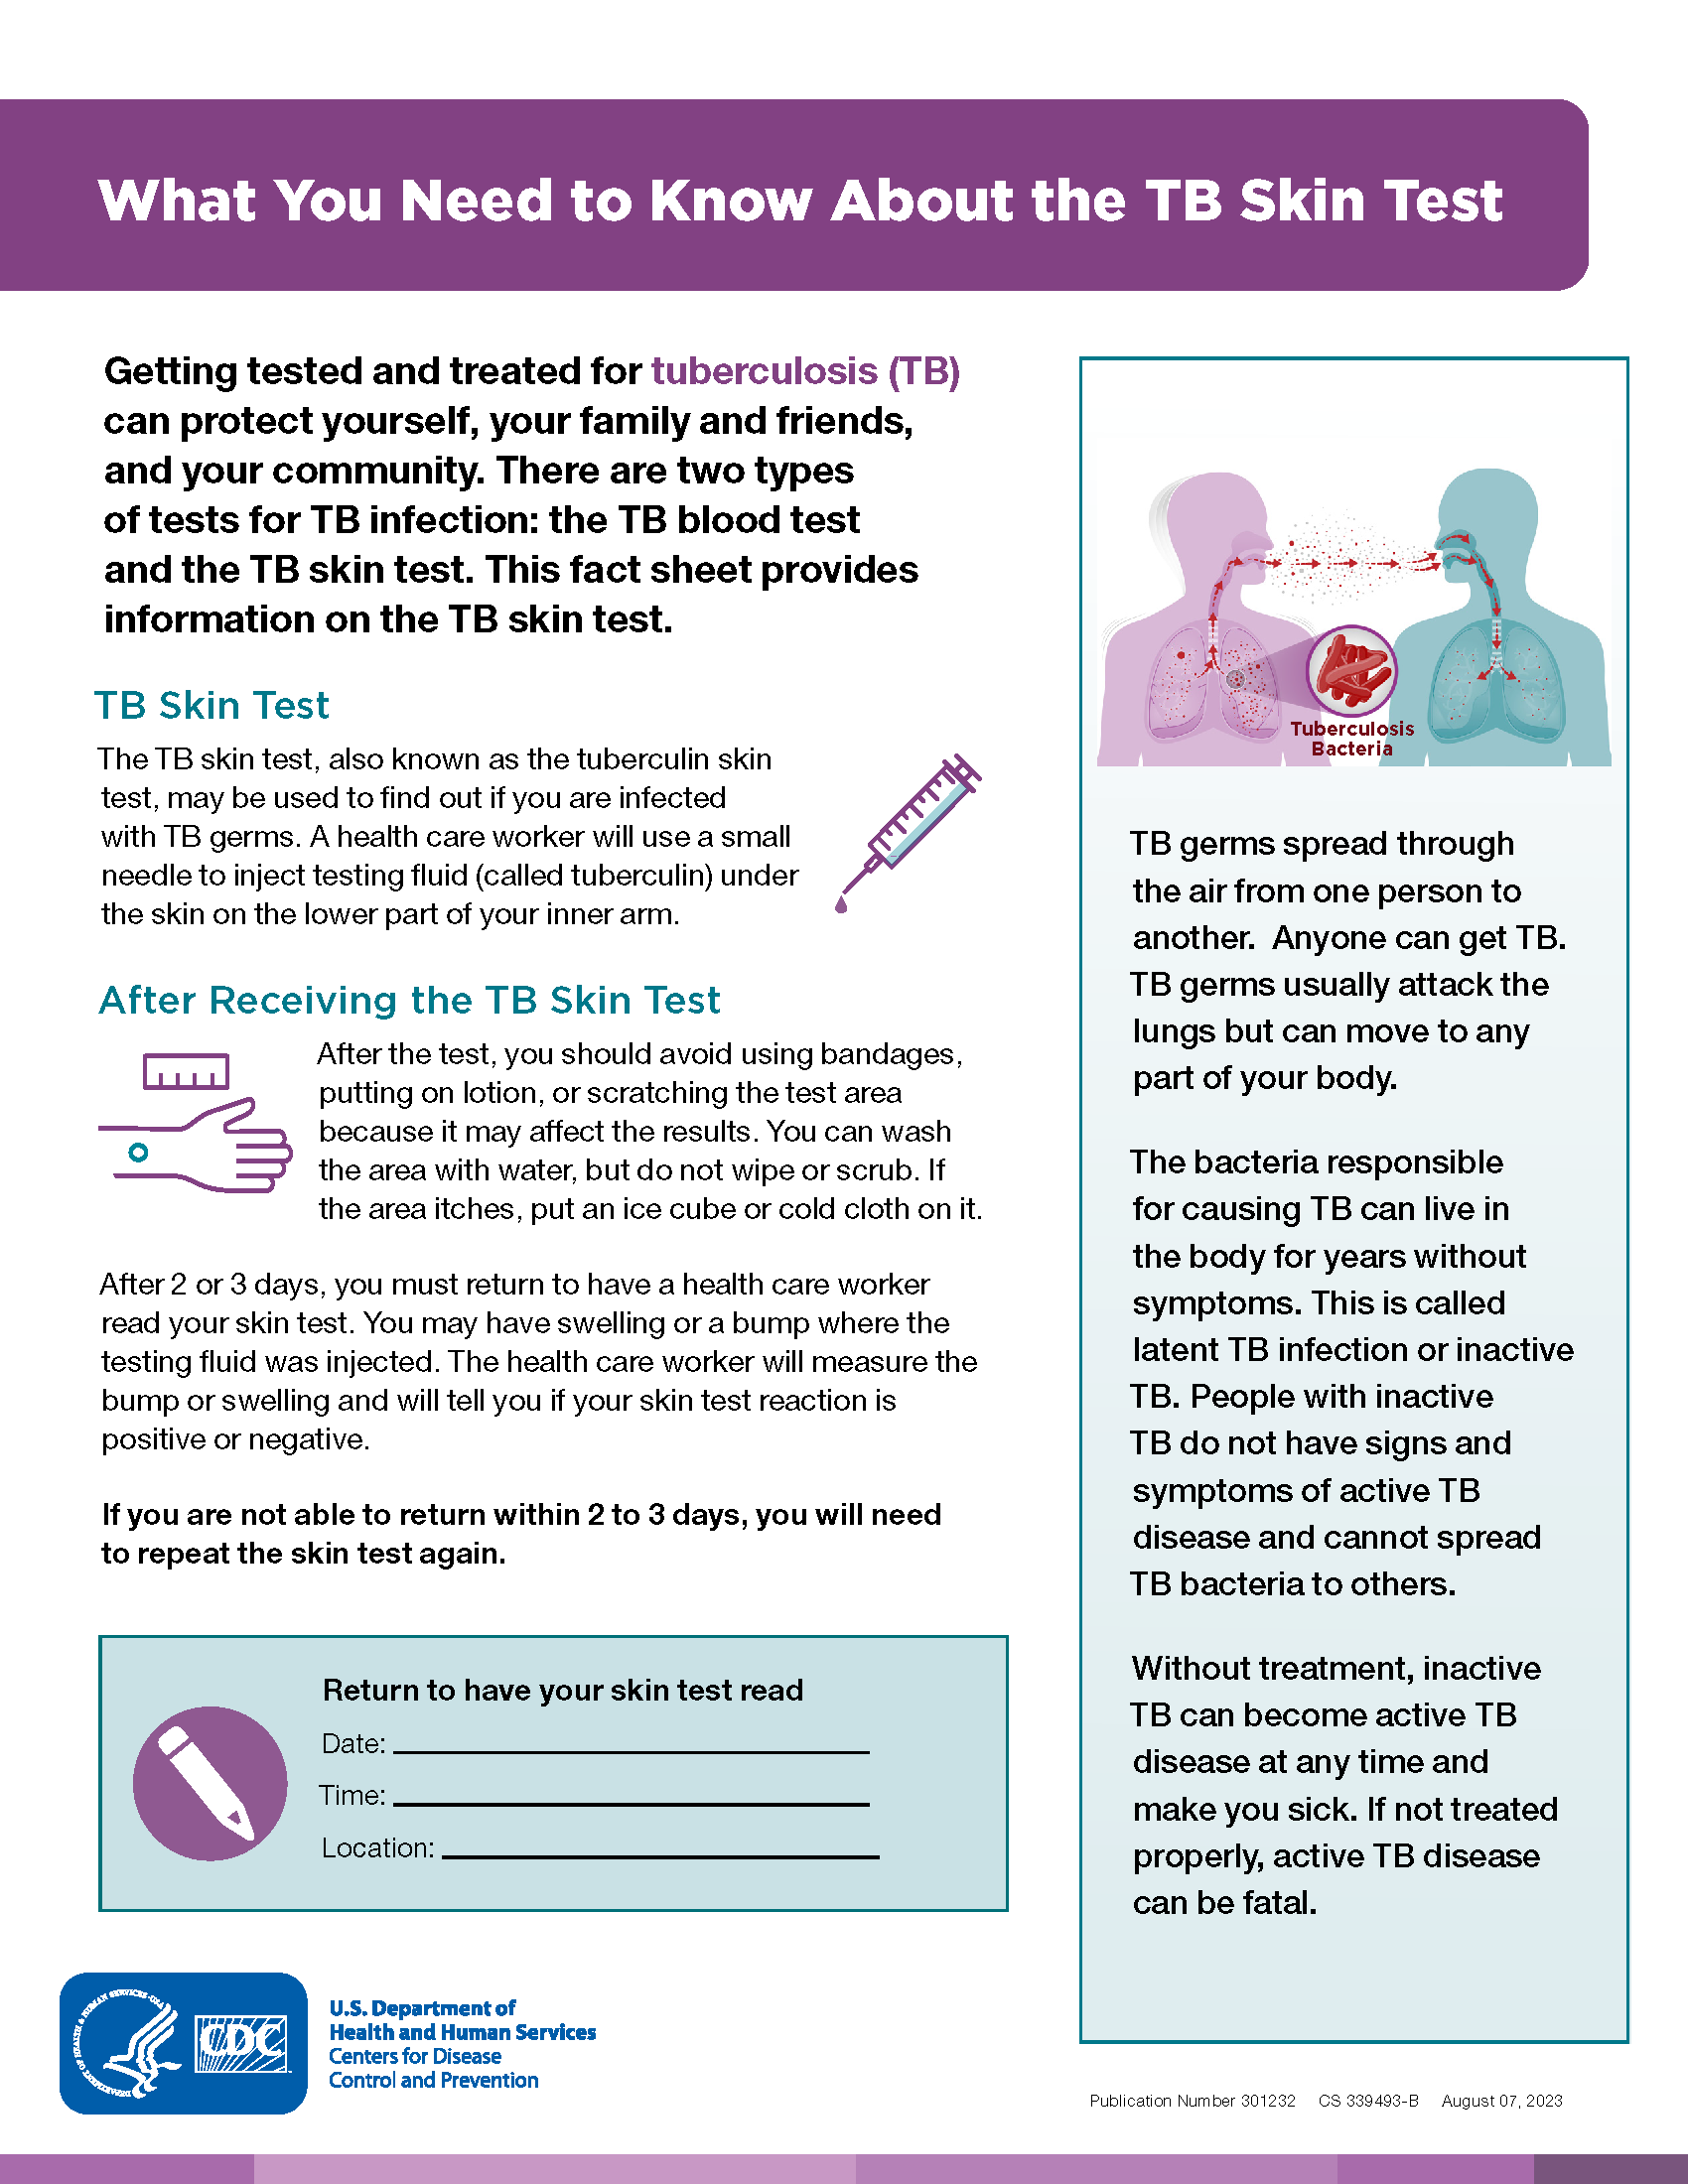 What You Need to Know About the TB Skin Test Fact Sheet